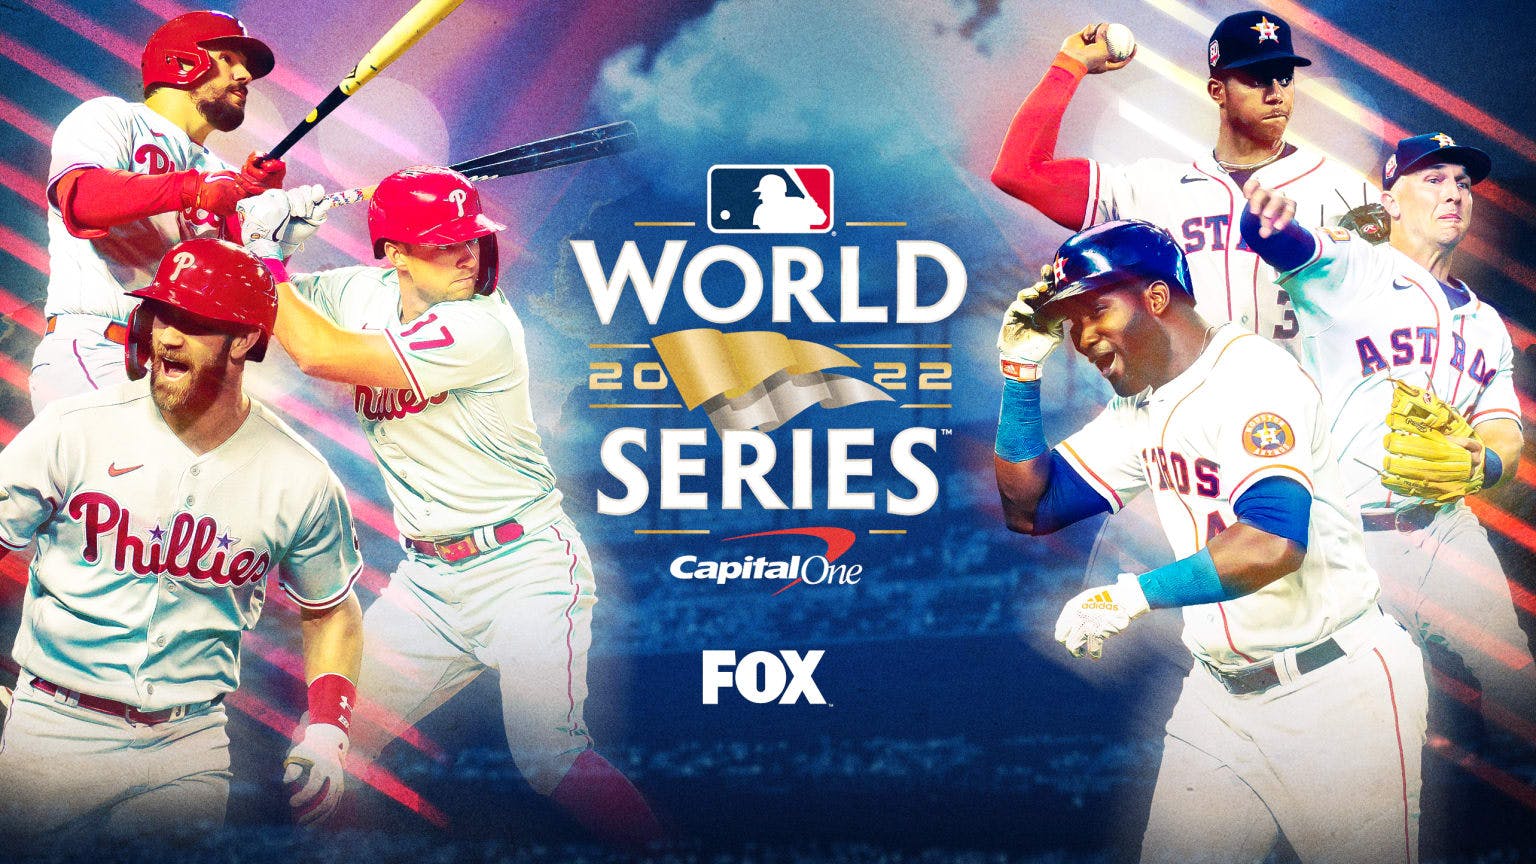 How to Watch the World Series for Free